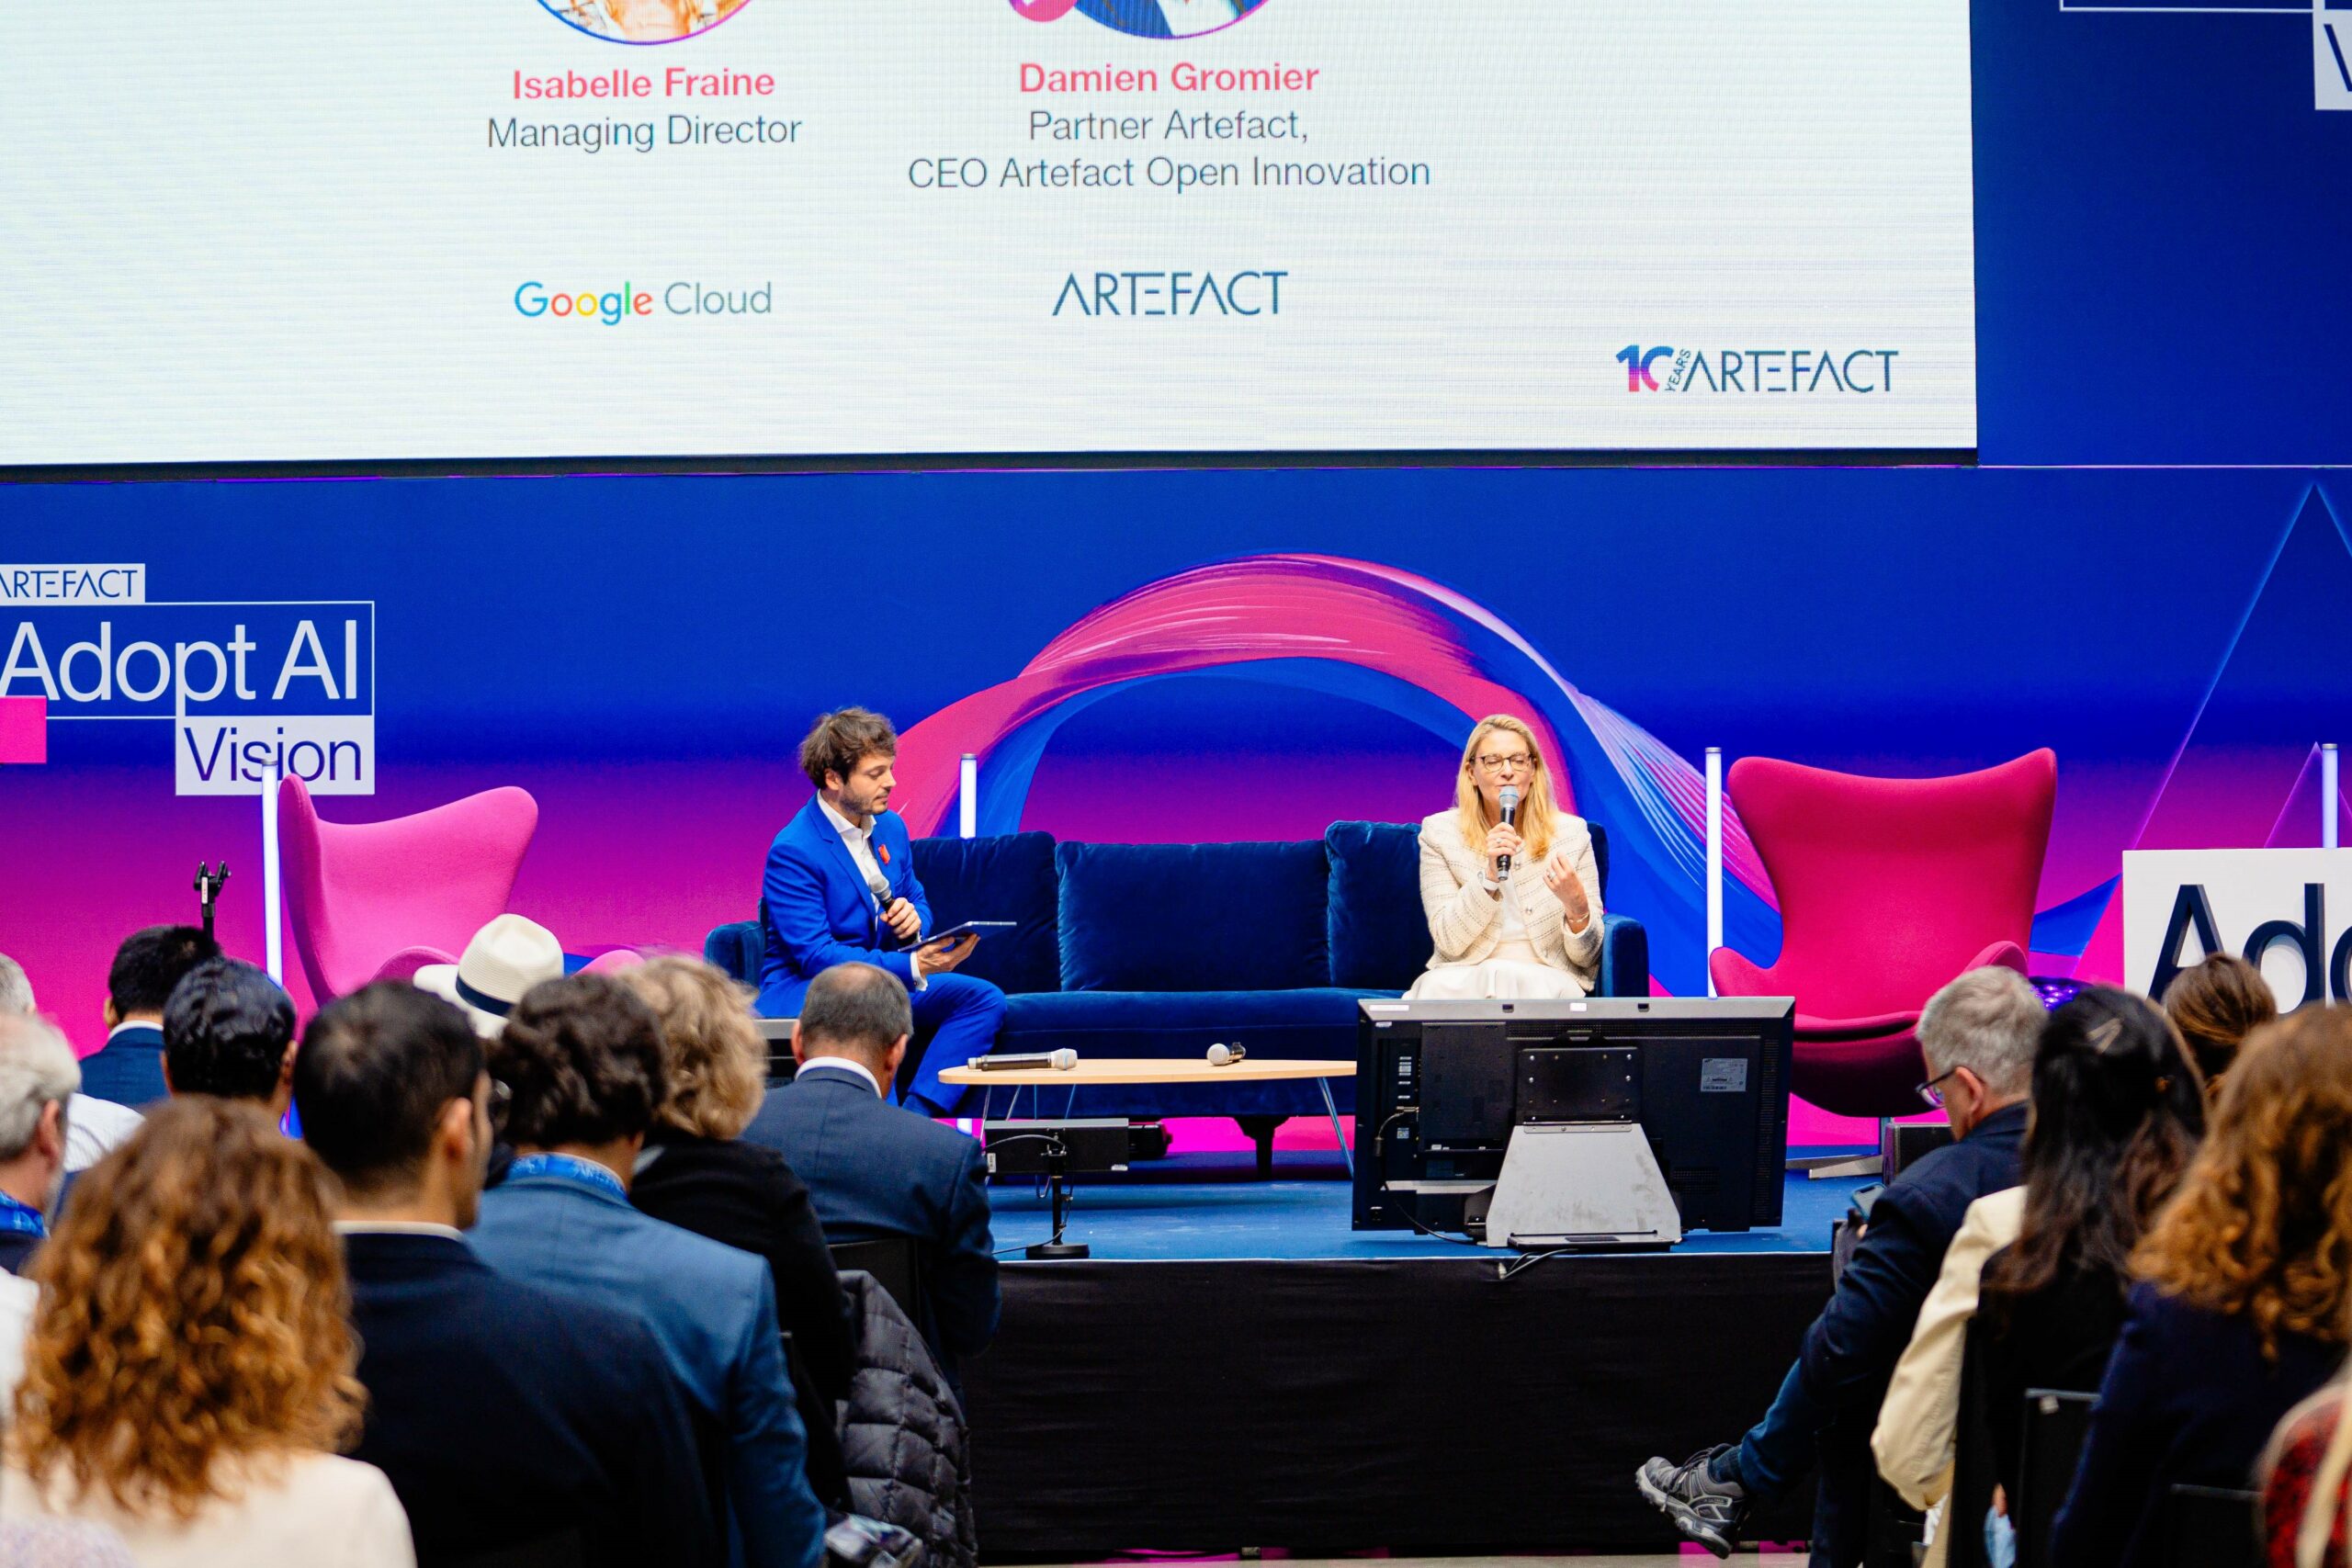 Isabelle Fraine, Managing Director of GOOGLE CLOUD FRANCE at the Adopt AI Summit – How cloud accelerates AI adoption in large companies